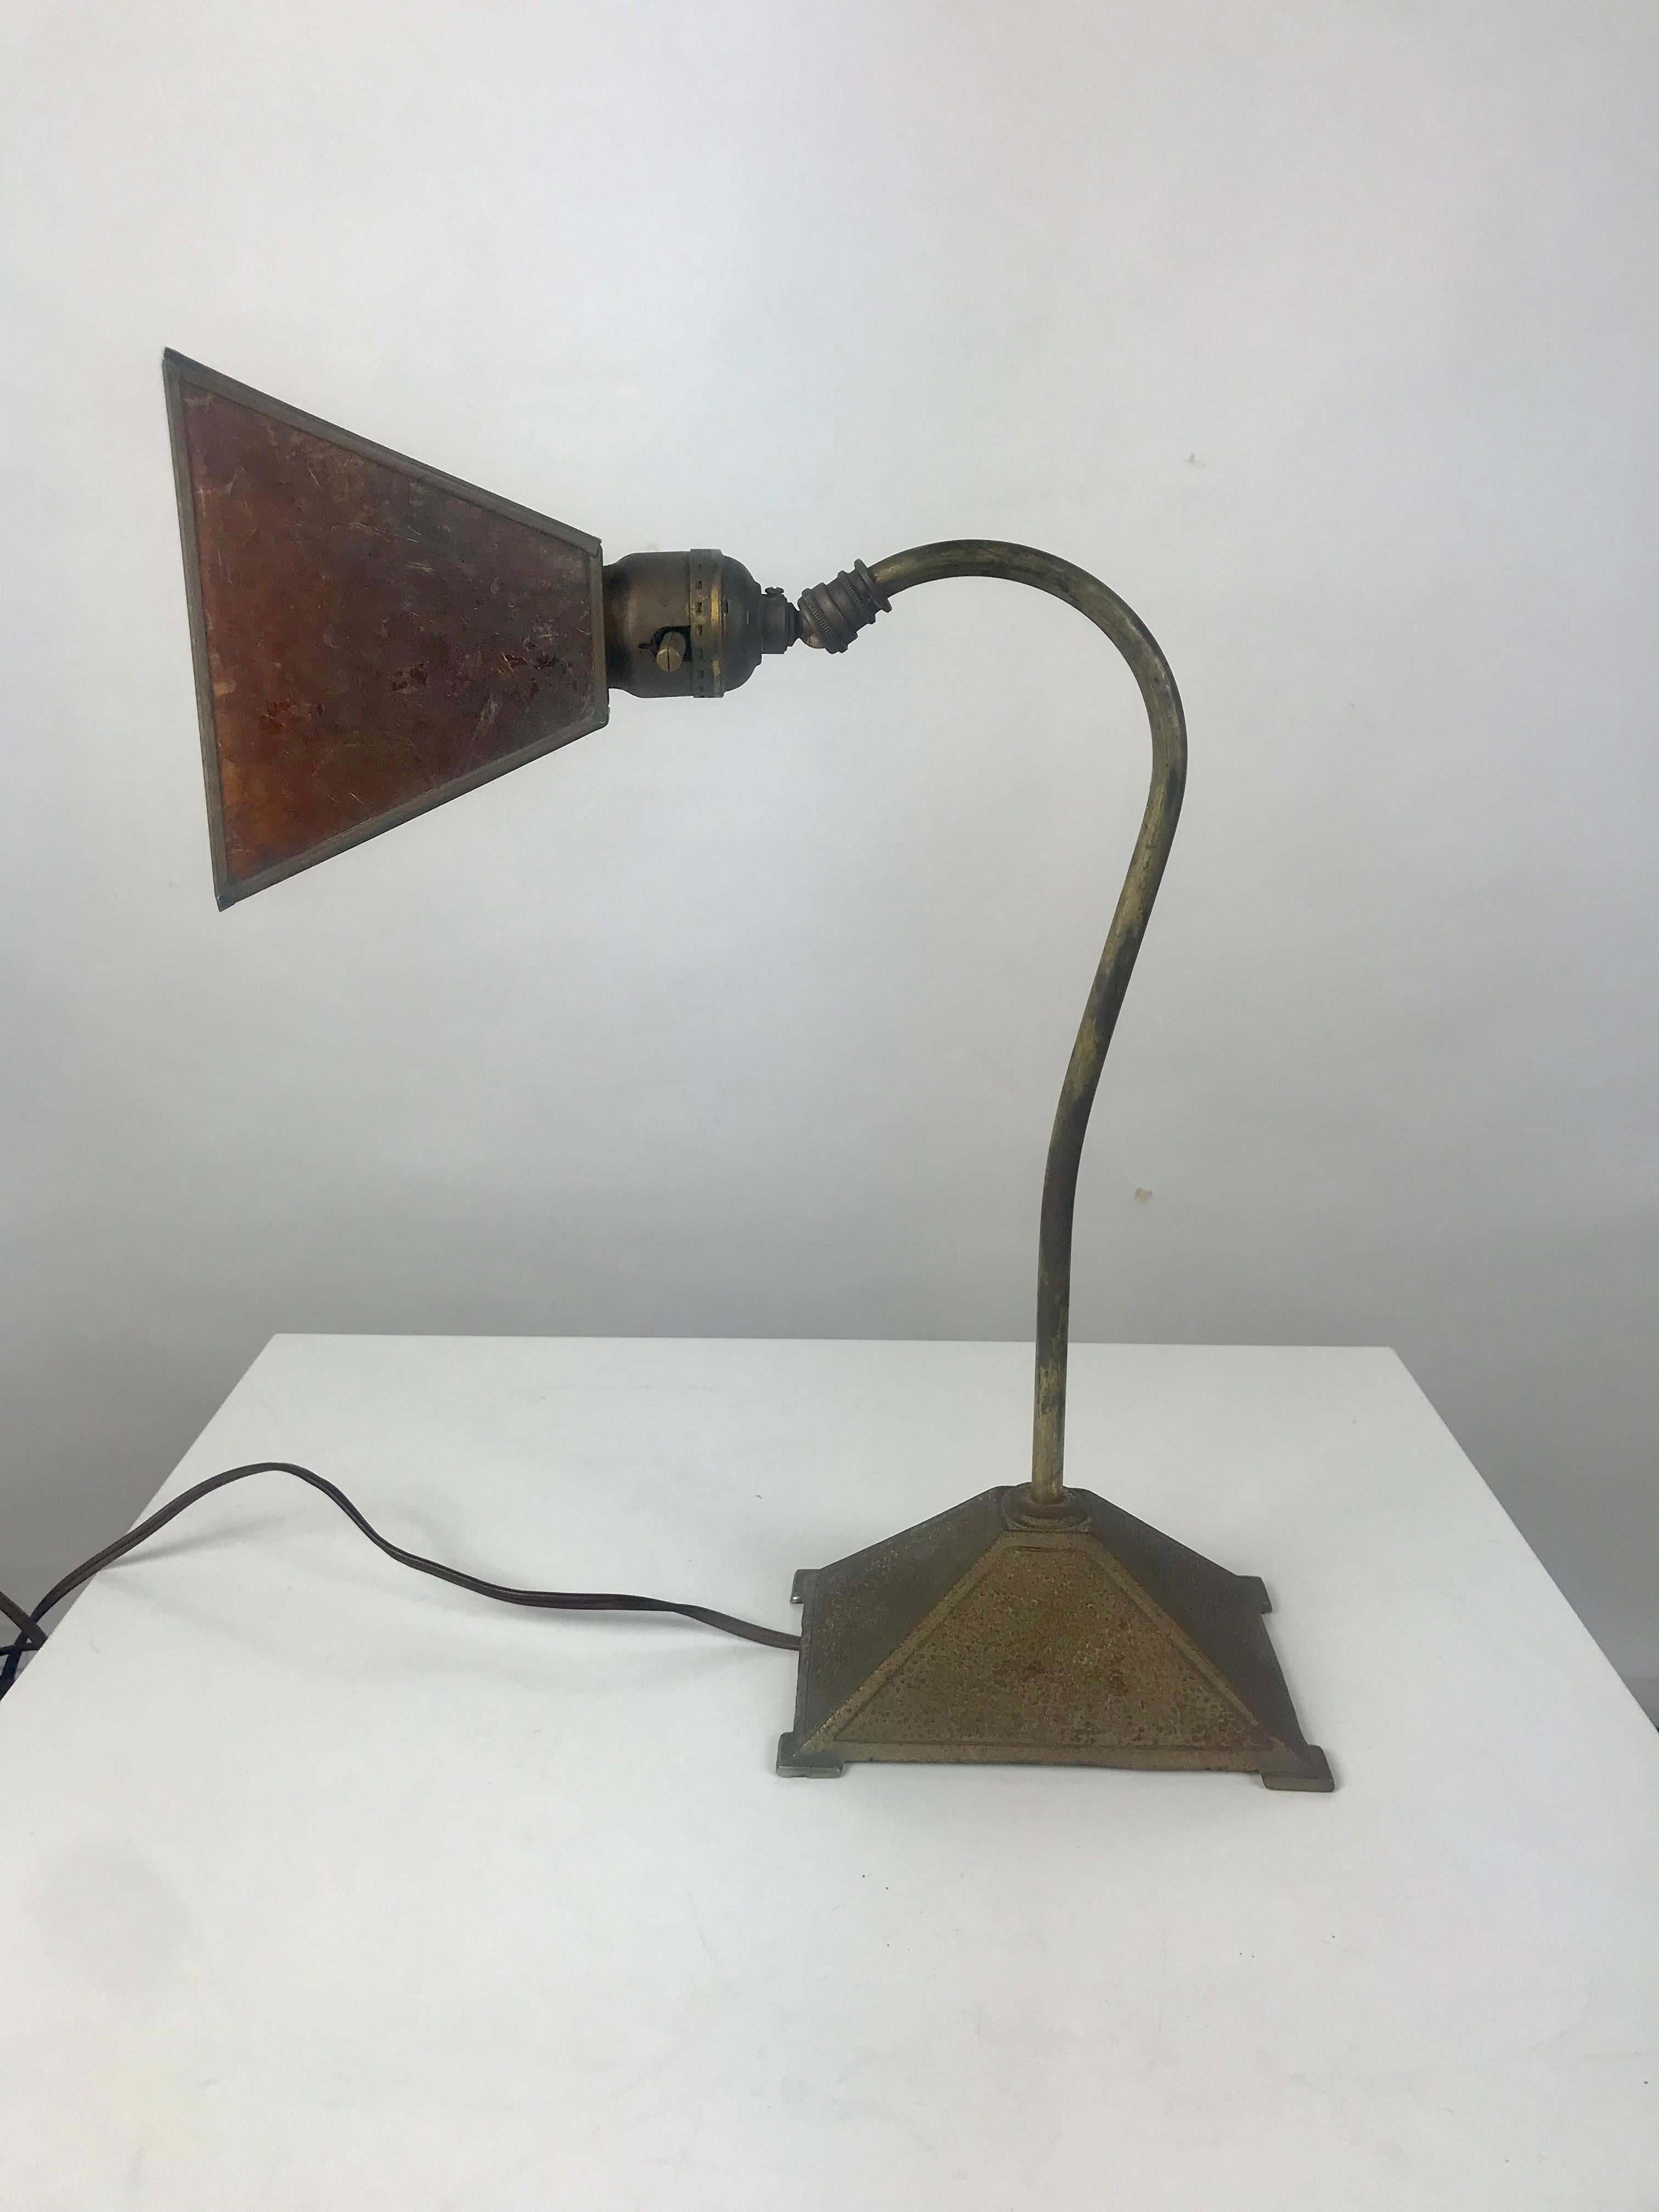 American Classic Arts & Crafts Metal and Mica Shade Desk Lamp by N Y W L F Co. Chicago